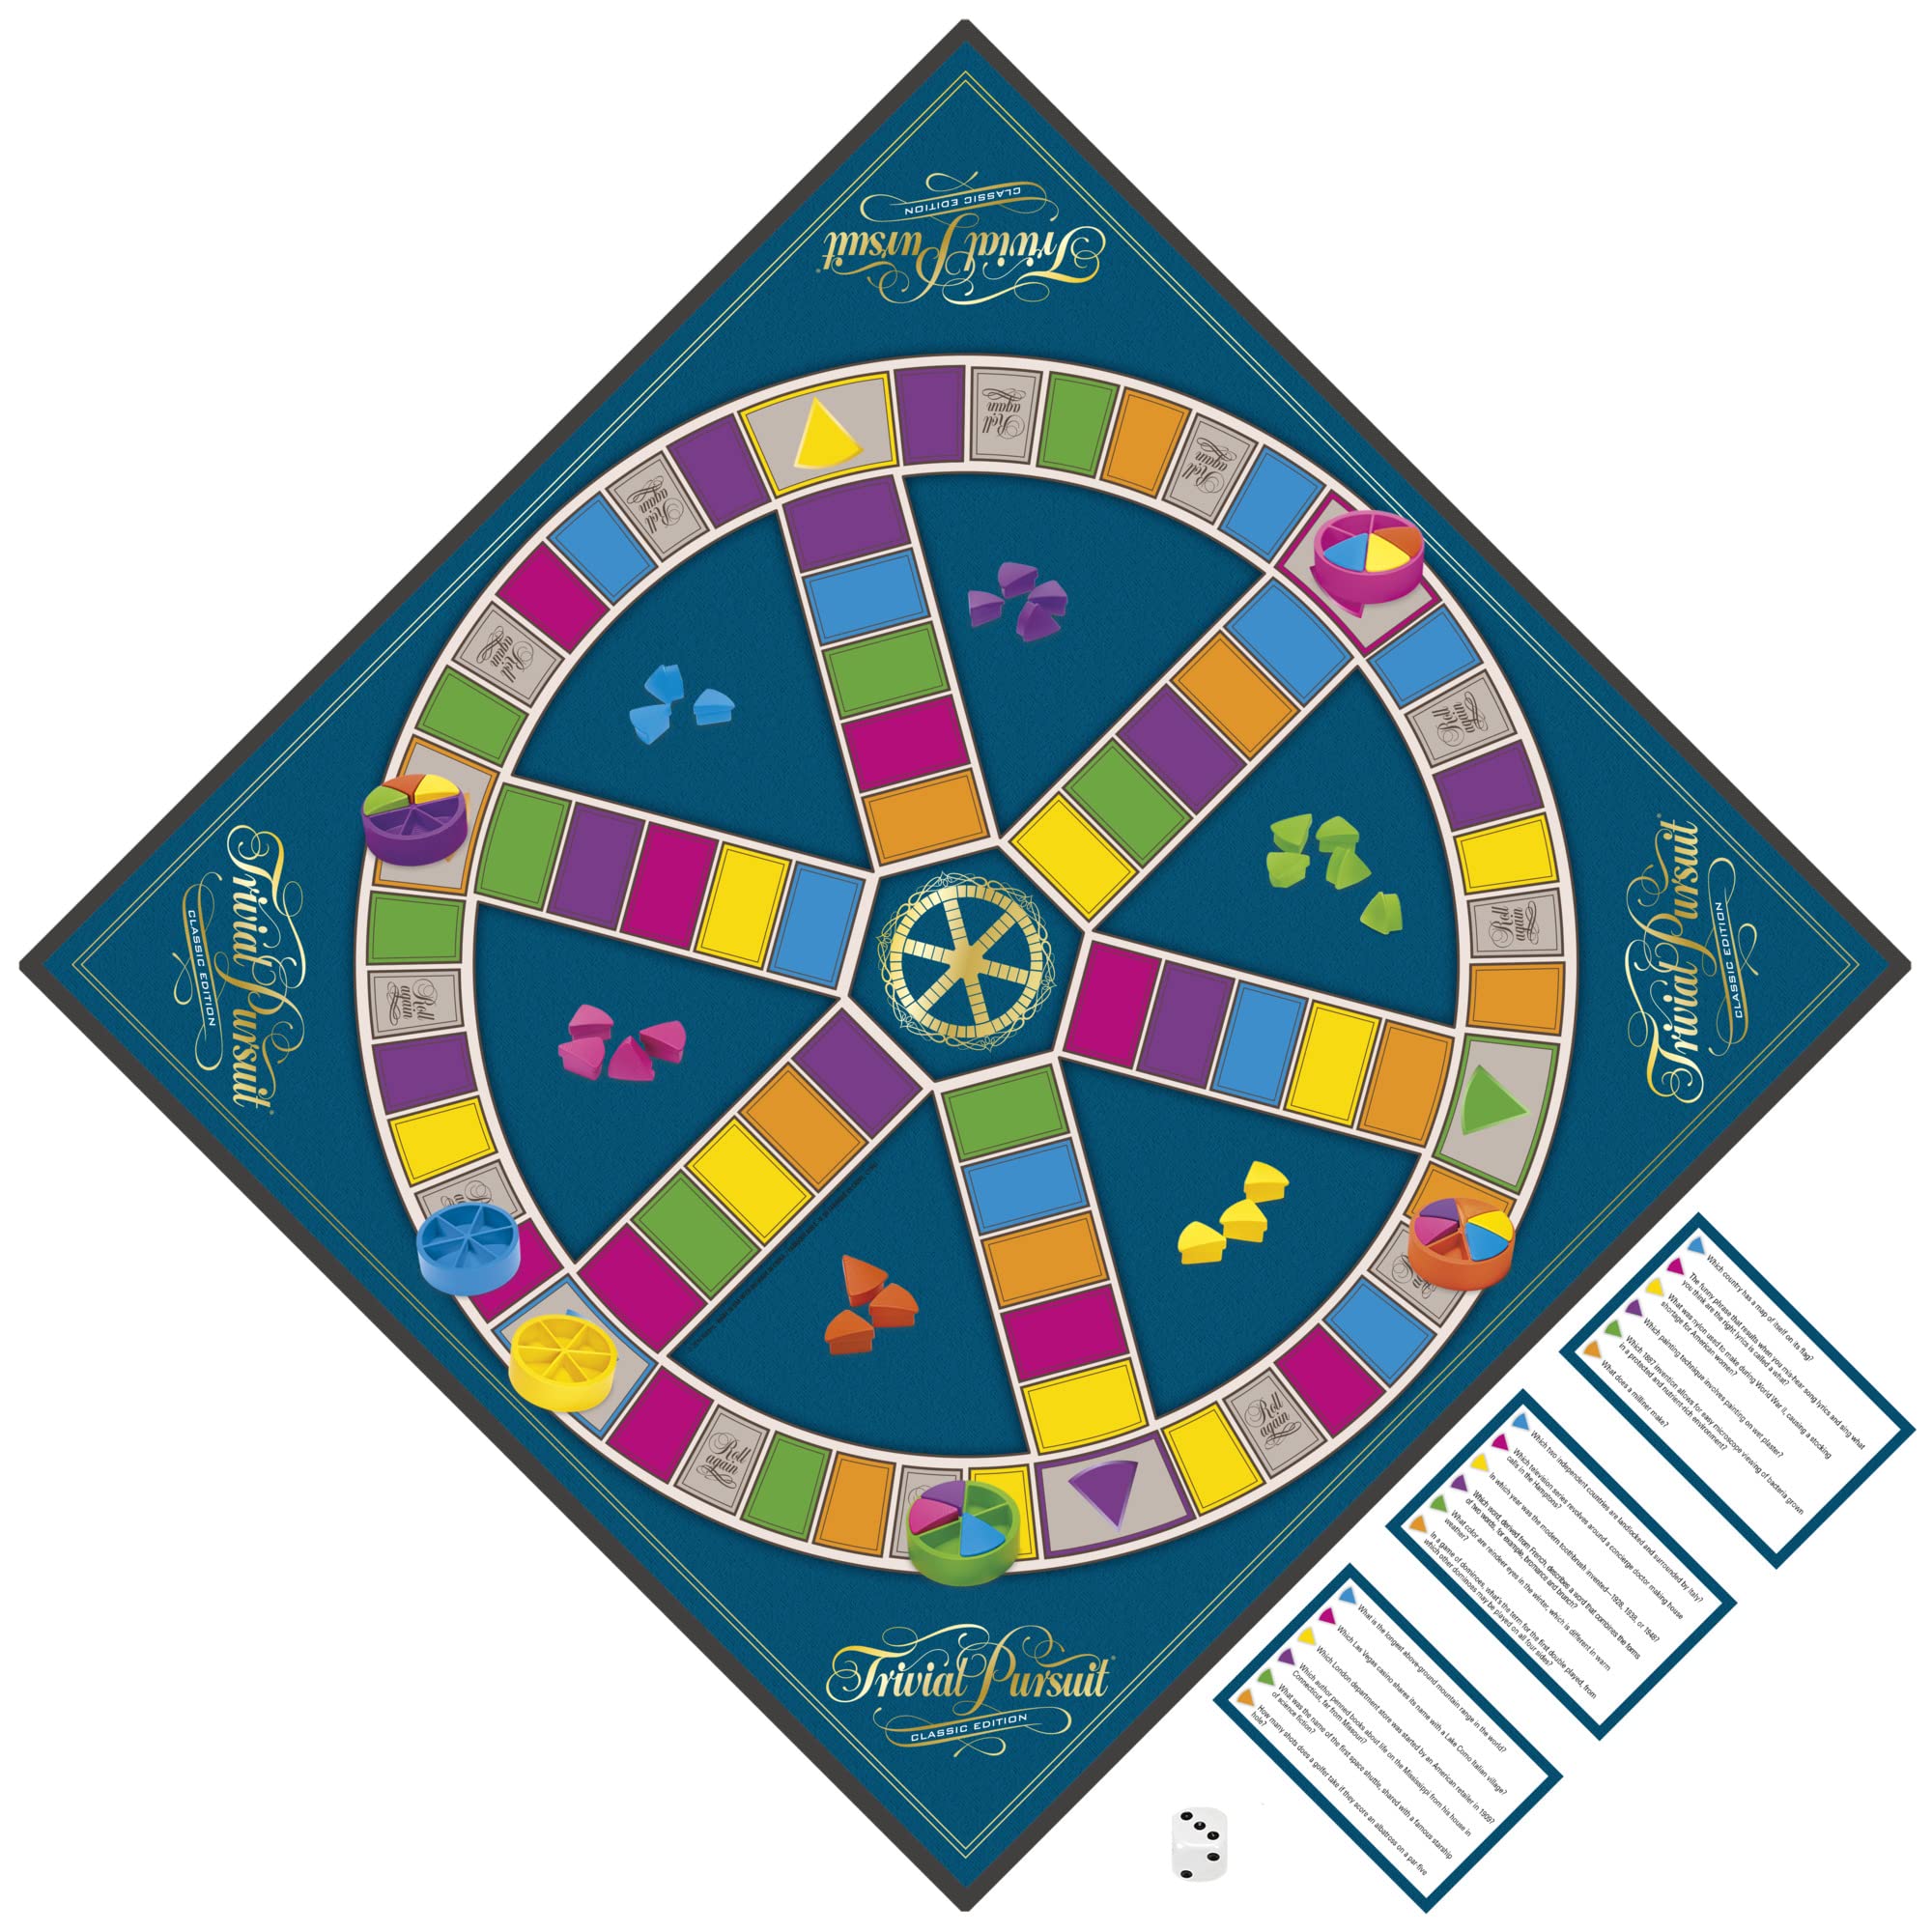 Hasbro Gaming Trivial Pursuit Game: Classic Edition